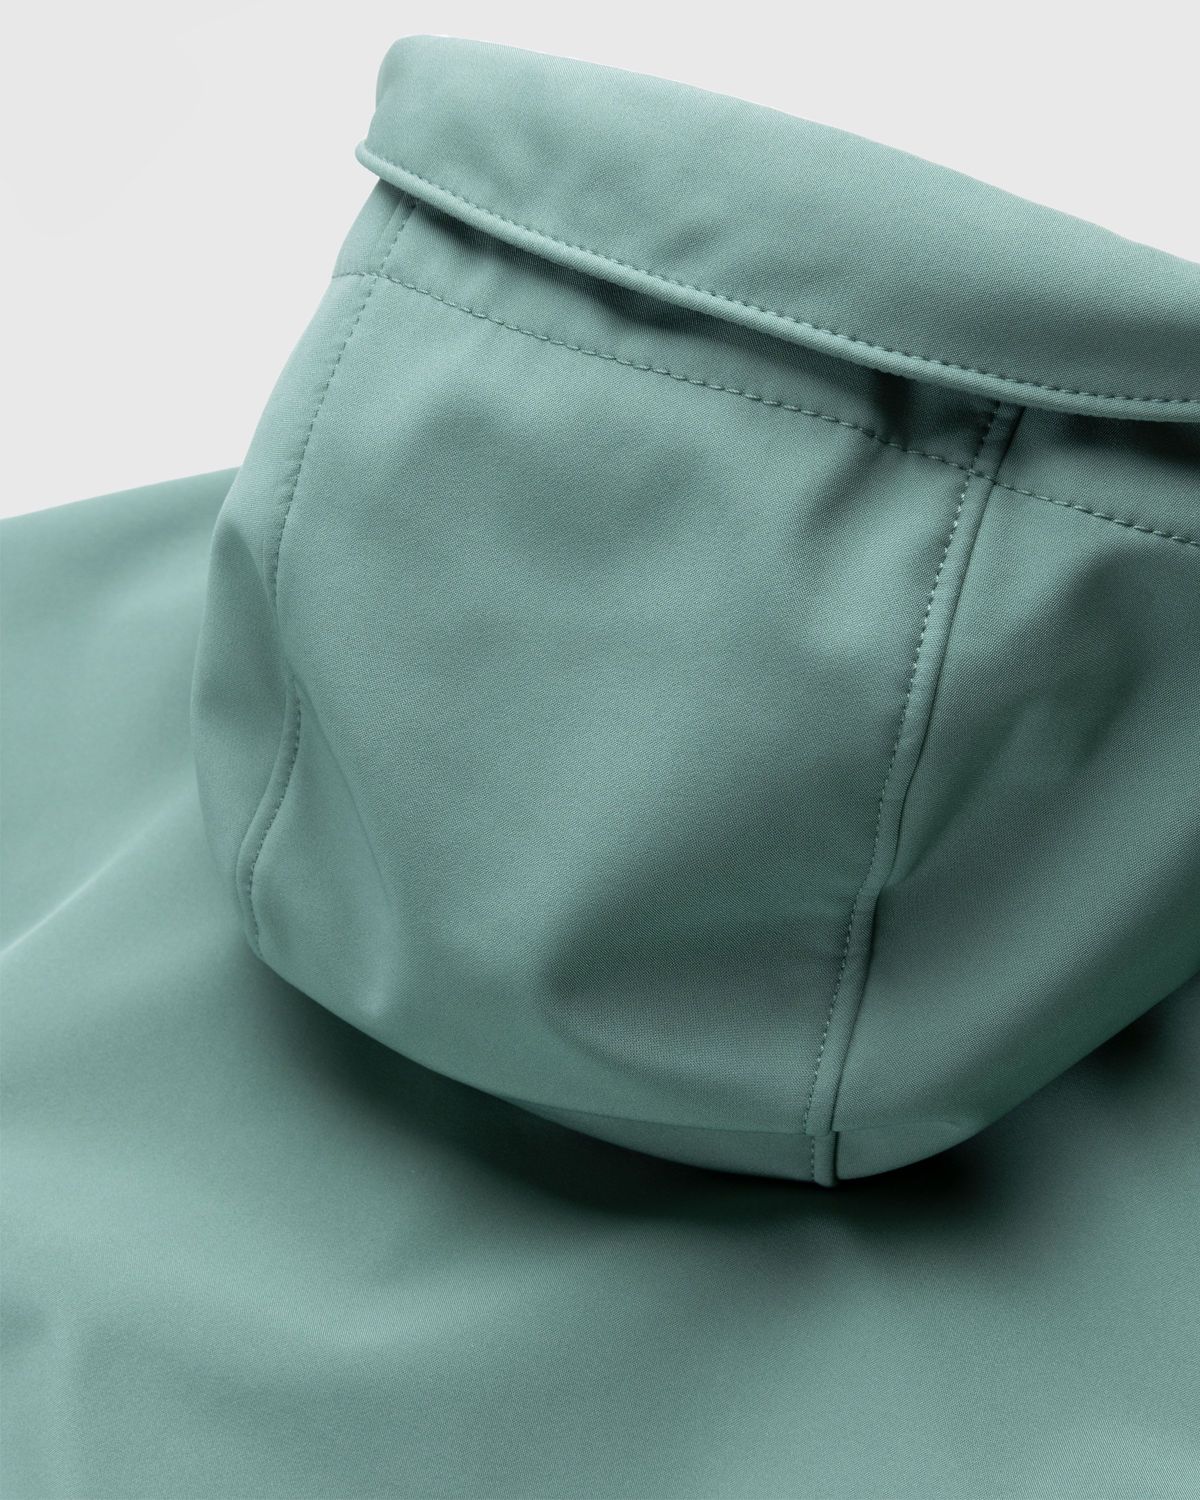 Stone Island – Soft Shell Hooded Jacket Sage - Outerwear - Green - Image 4